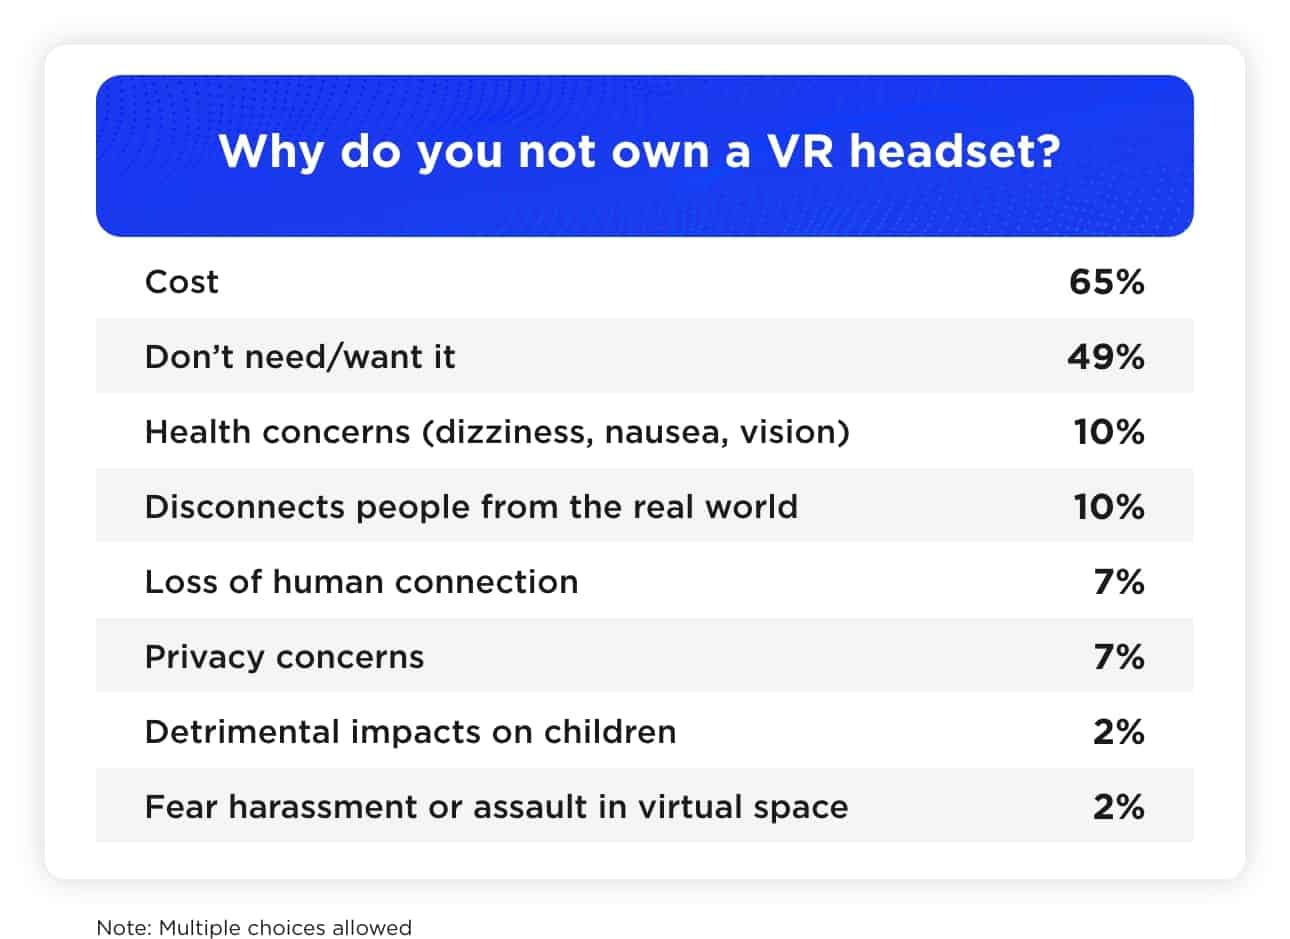 Why do you not own a VR headset?